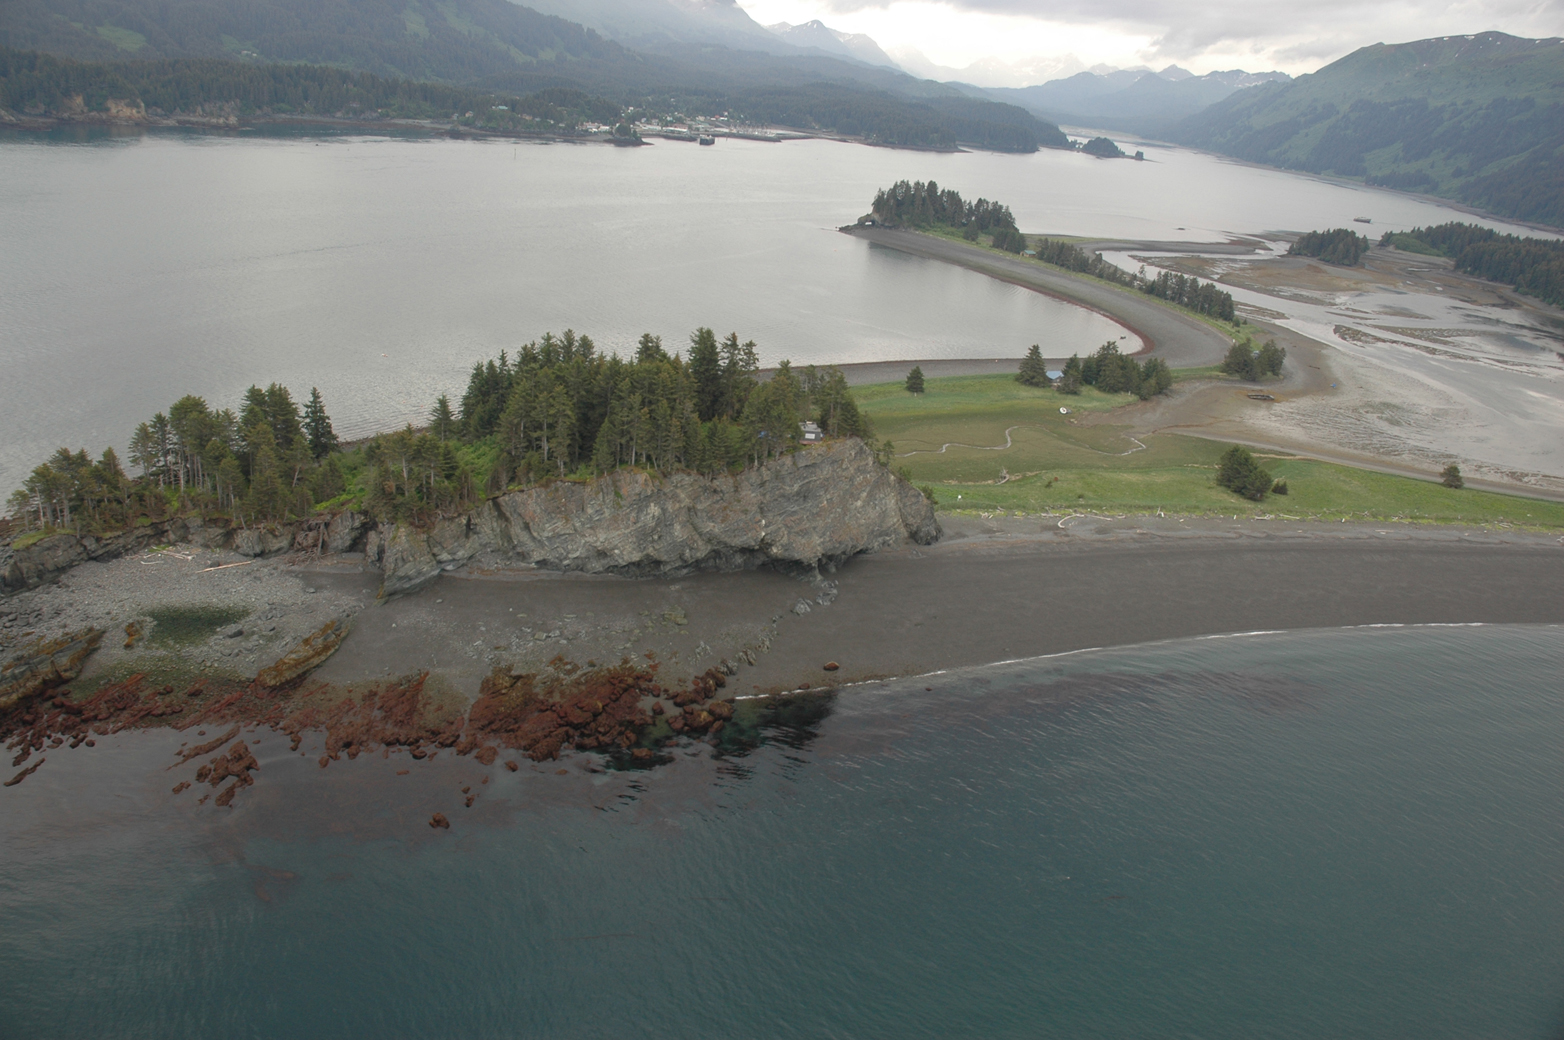 This view of Seldovia Bay, looking from Point Naskowhak toward Seldovia in the background, is part of Alaska ShoreZone, a catalog of high-resolution still and video images that provide bird’s-eye views of Alaska beaches. The photo was taken from a helicopter during June 2009, at low tide.-Image courtesy of Alaska ShoreZone.